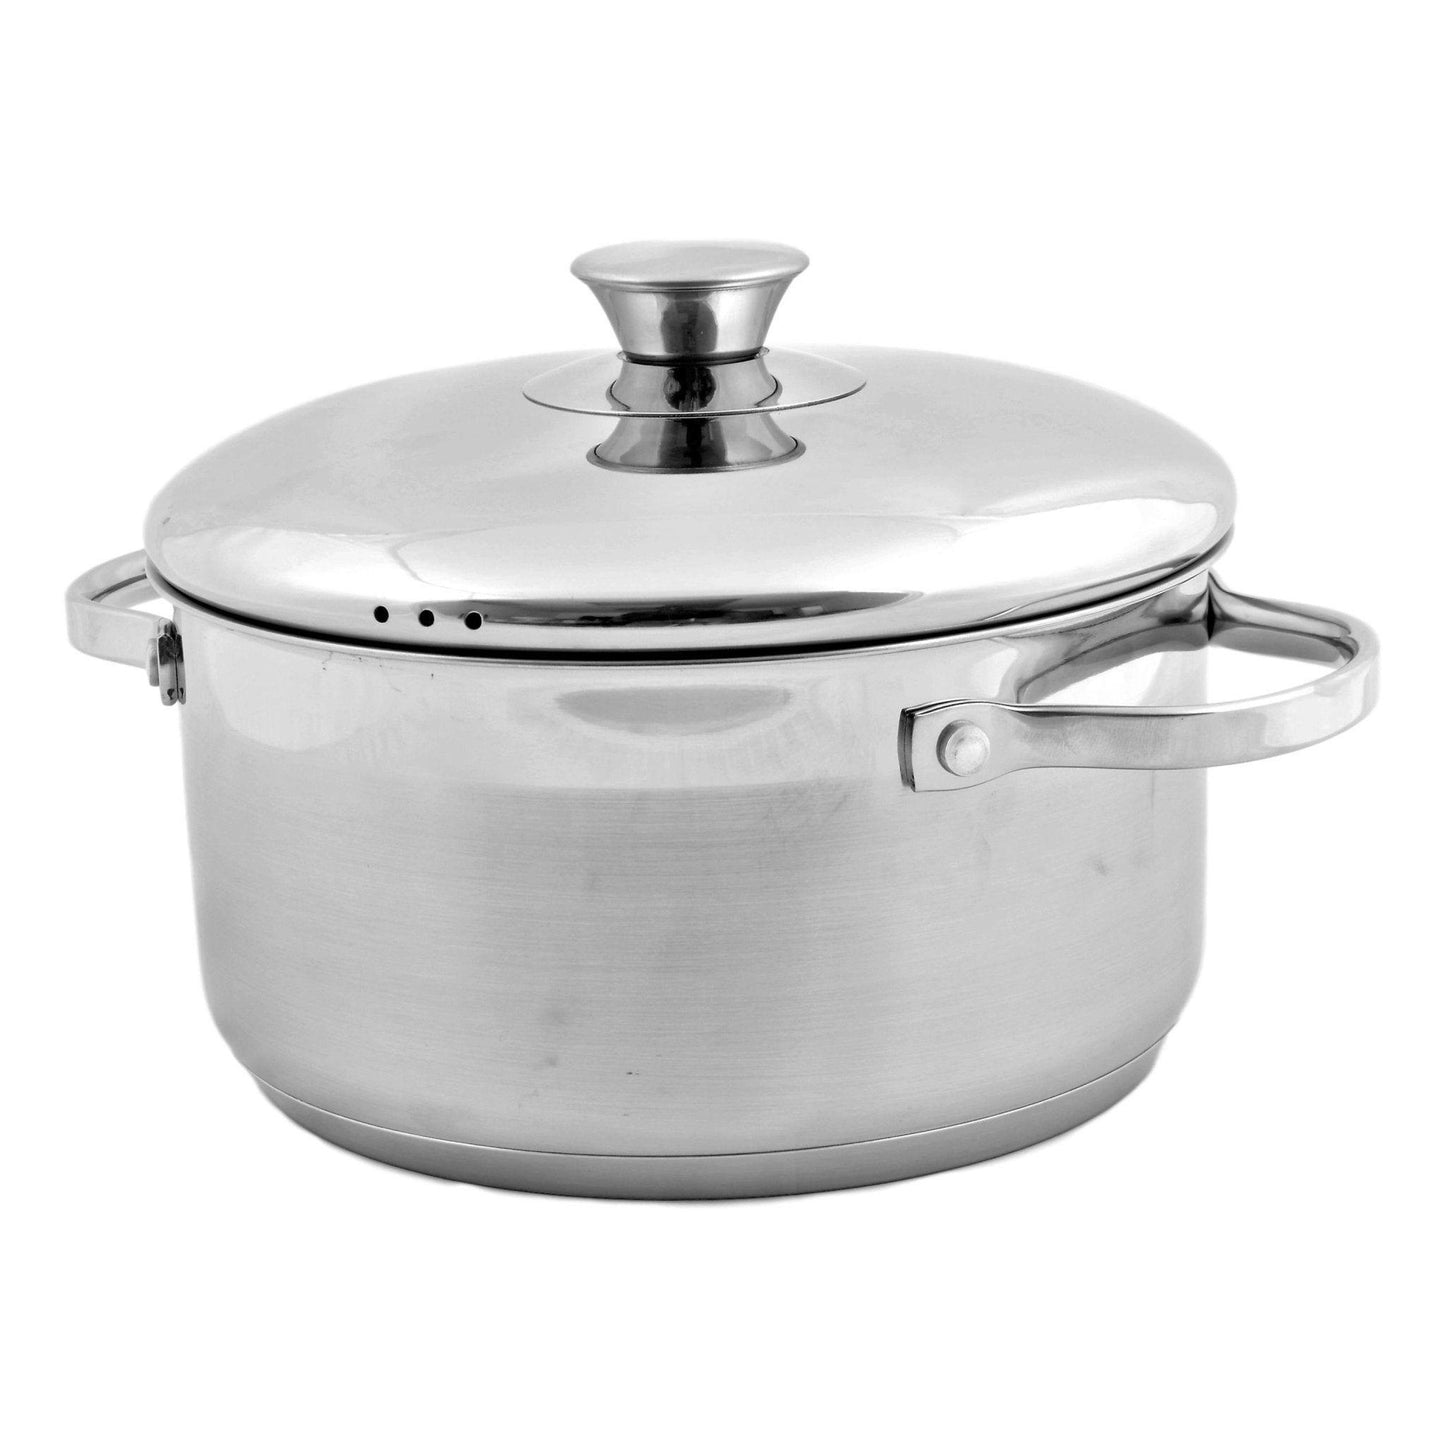 Heavy Duty Stock Pots Stainless Steel | 3.25 Quart With Lid - Nature Home Decor